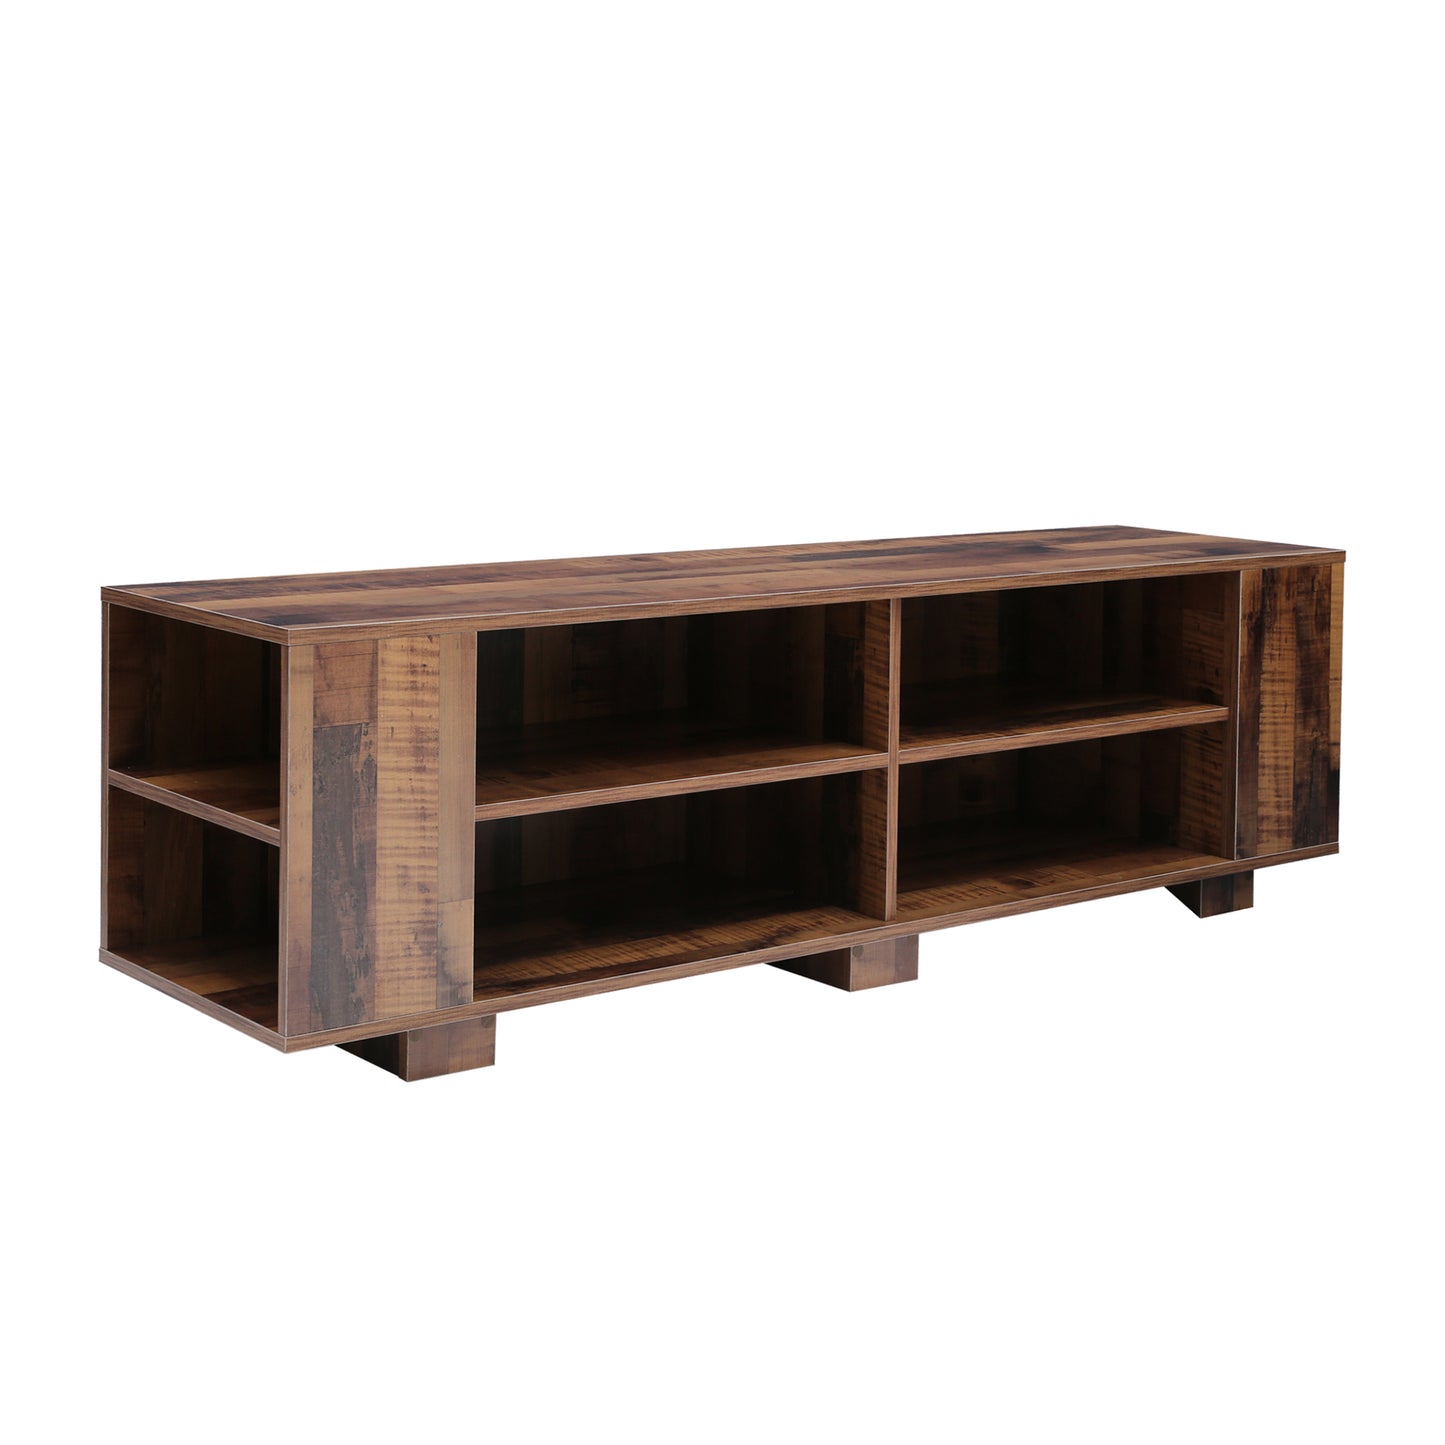 Universal TV Storage Cabinet for Living Room Bedroom, TV Console Table